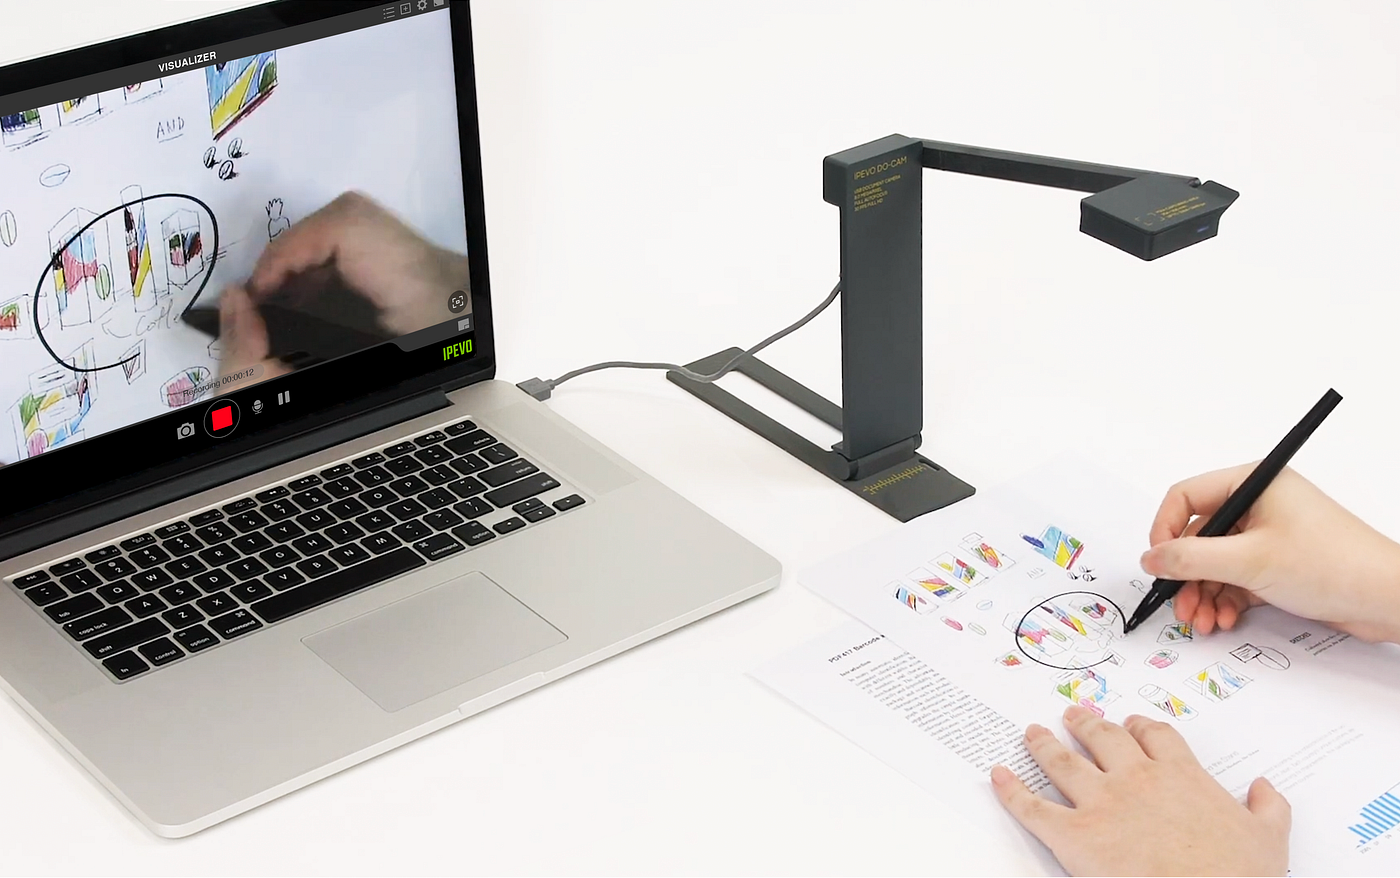 Top 5 Ways to Use a Document Camera In a Classroom